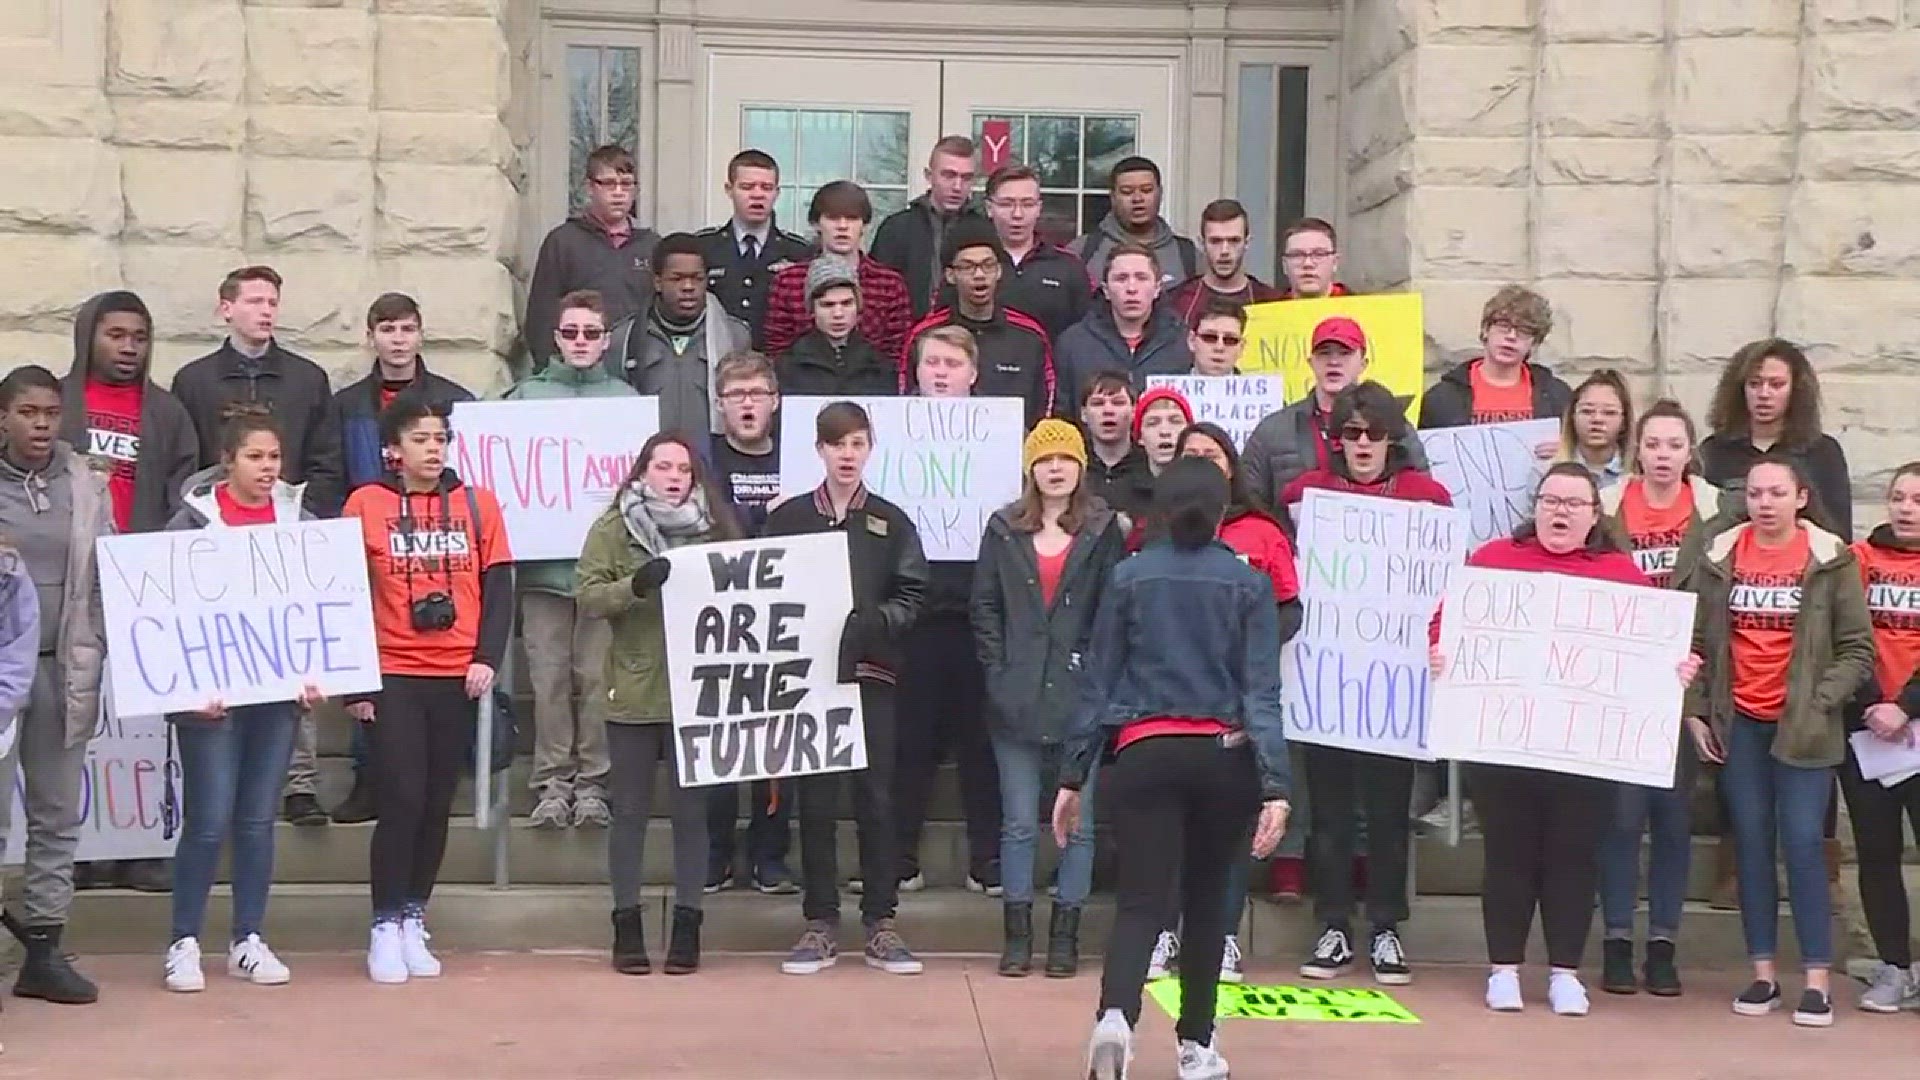 March 14, 2018: The choir at Elyria High School joined in song amid their stance against gun violence during the national walkout.